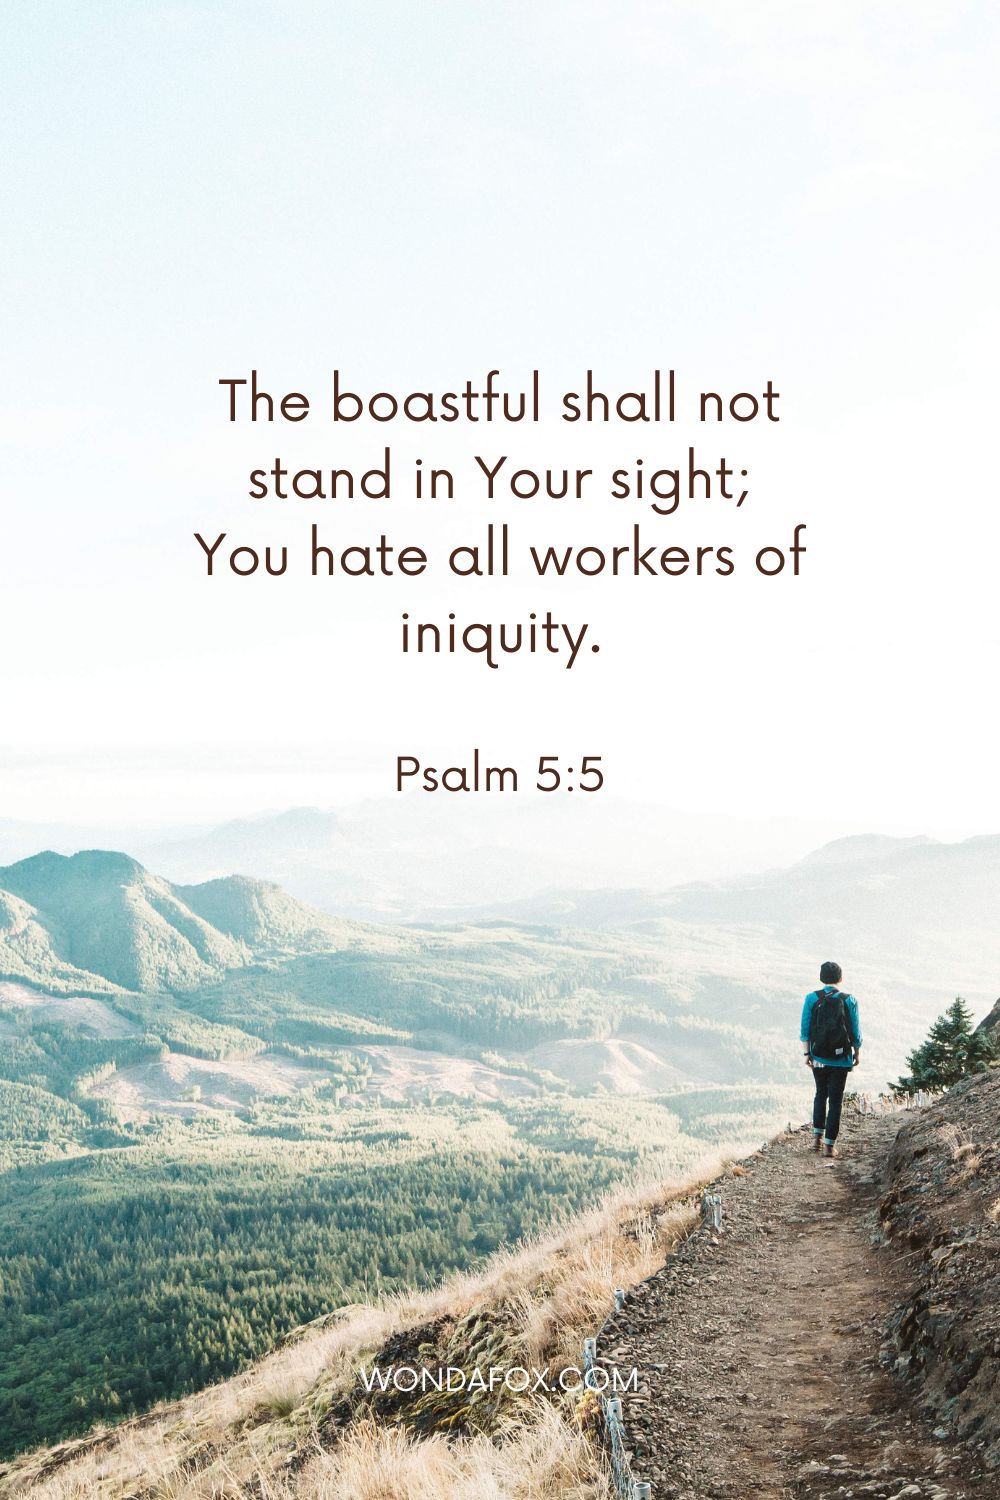 The boastful shall not stand in Your sight; You hate all workers of iniquity.